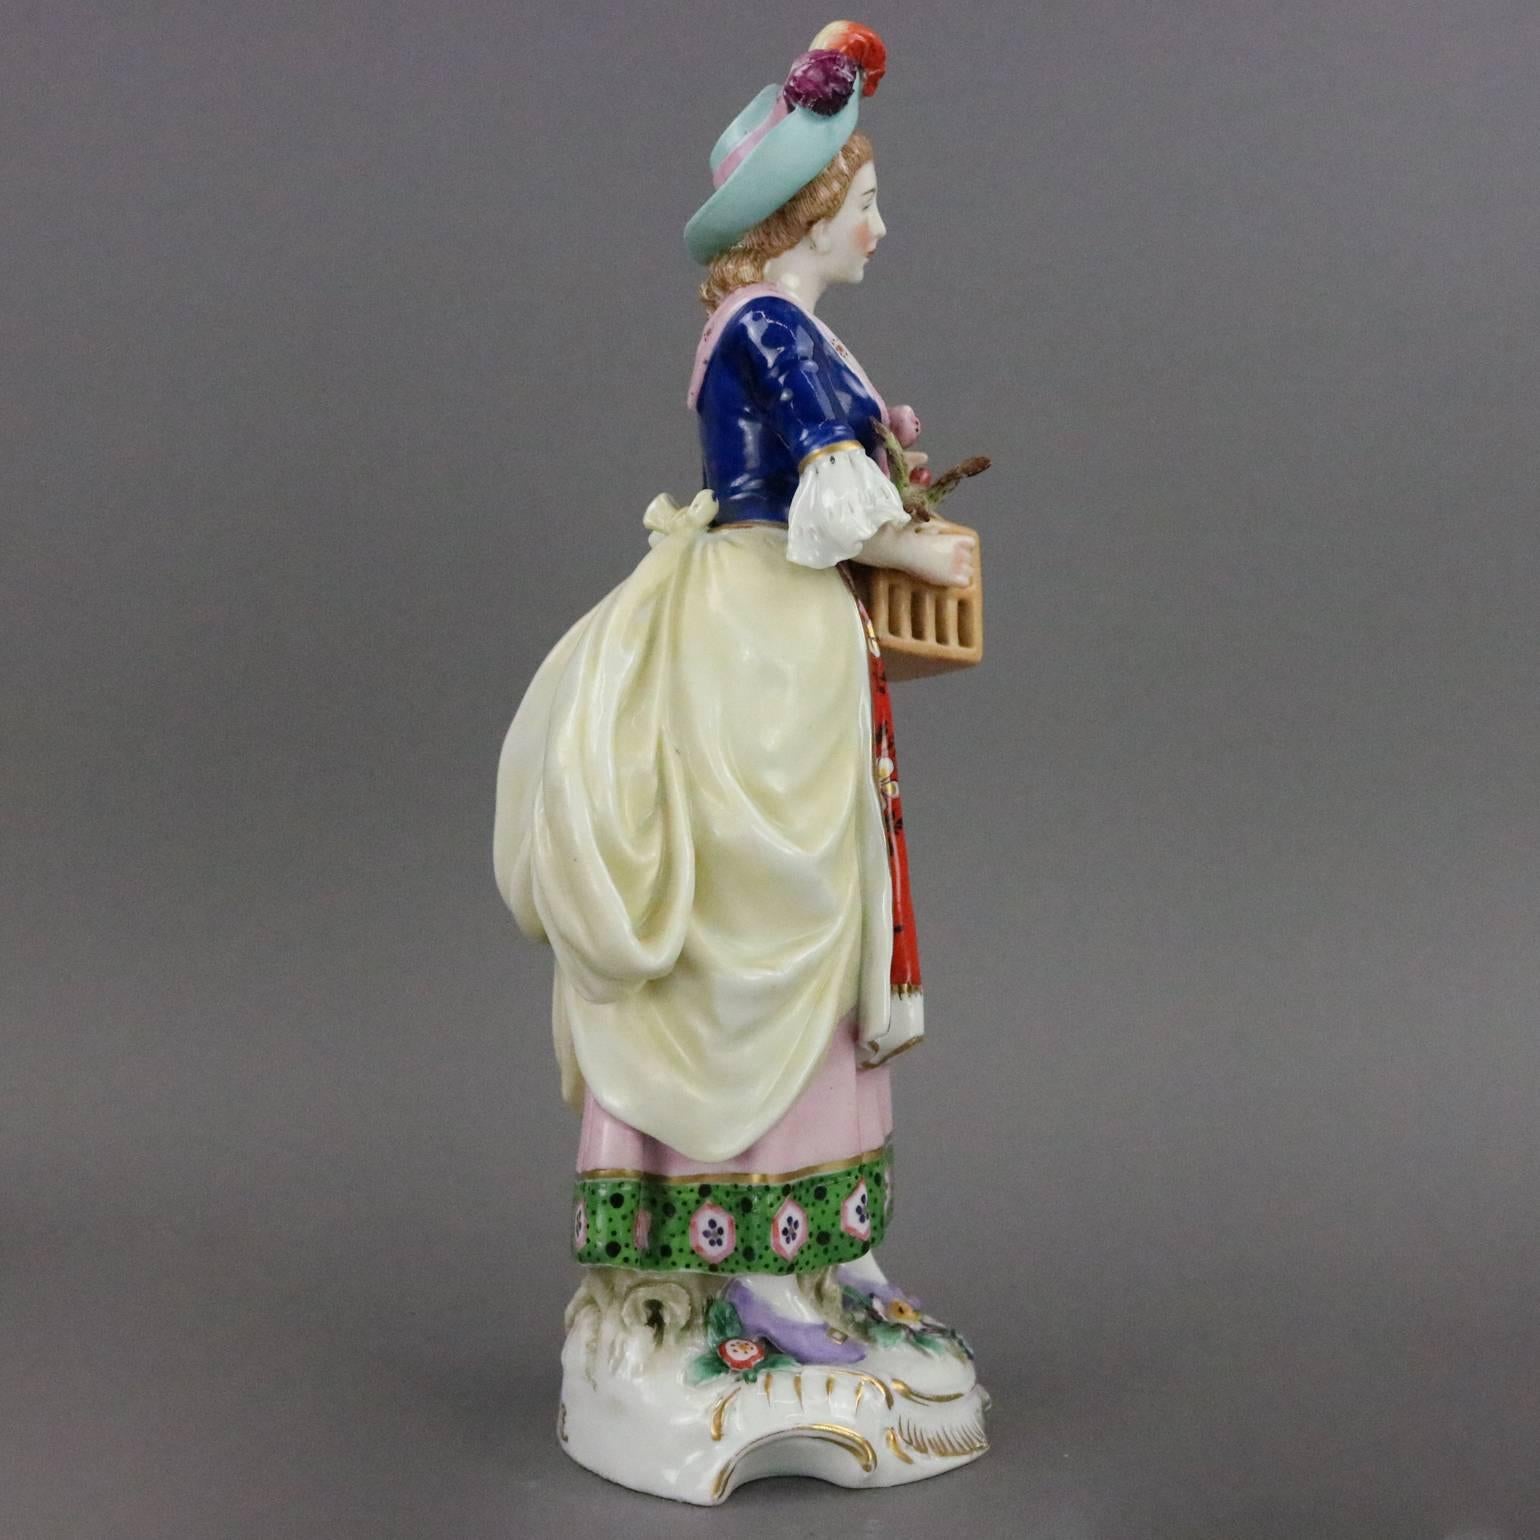 Antique English Chelsea hand-painted porcelain figure of woman with her bird and carrying a birdcage, highly detailed, gold anchor Chelsea maker mark on base, circa 1820.

Measures: 9" height X 3.5" diameter.